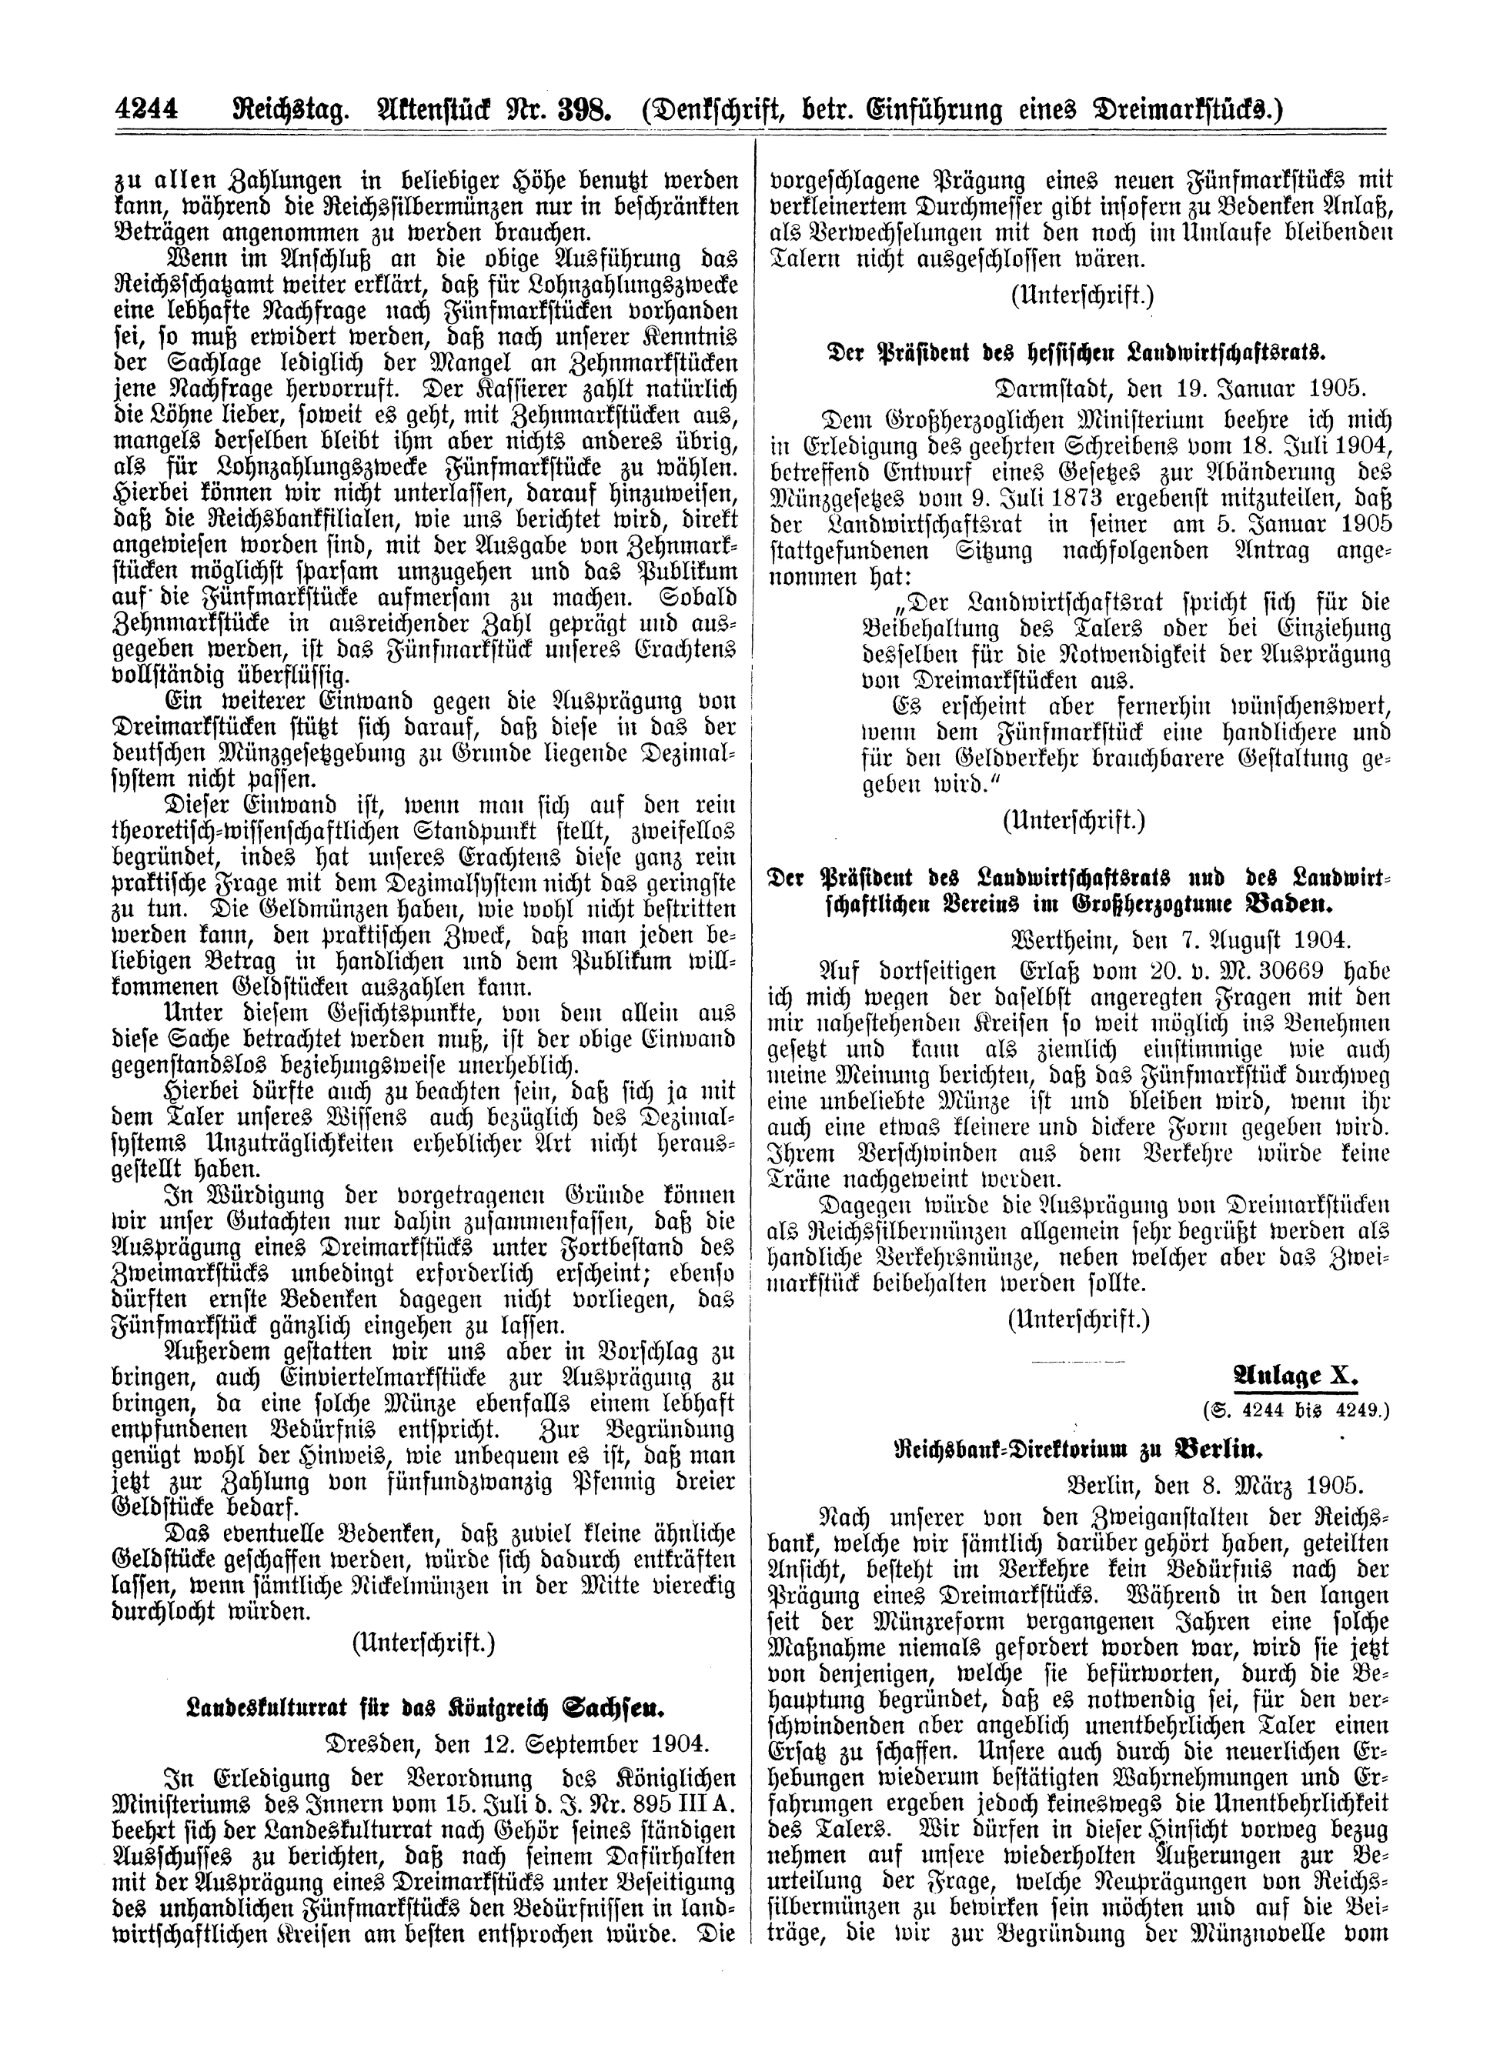 Scan of page 4244